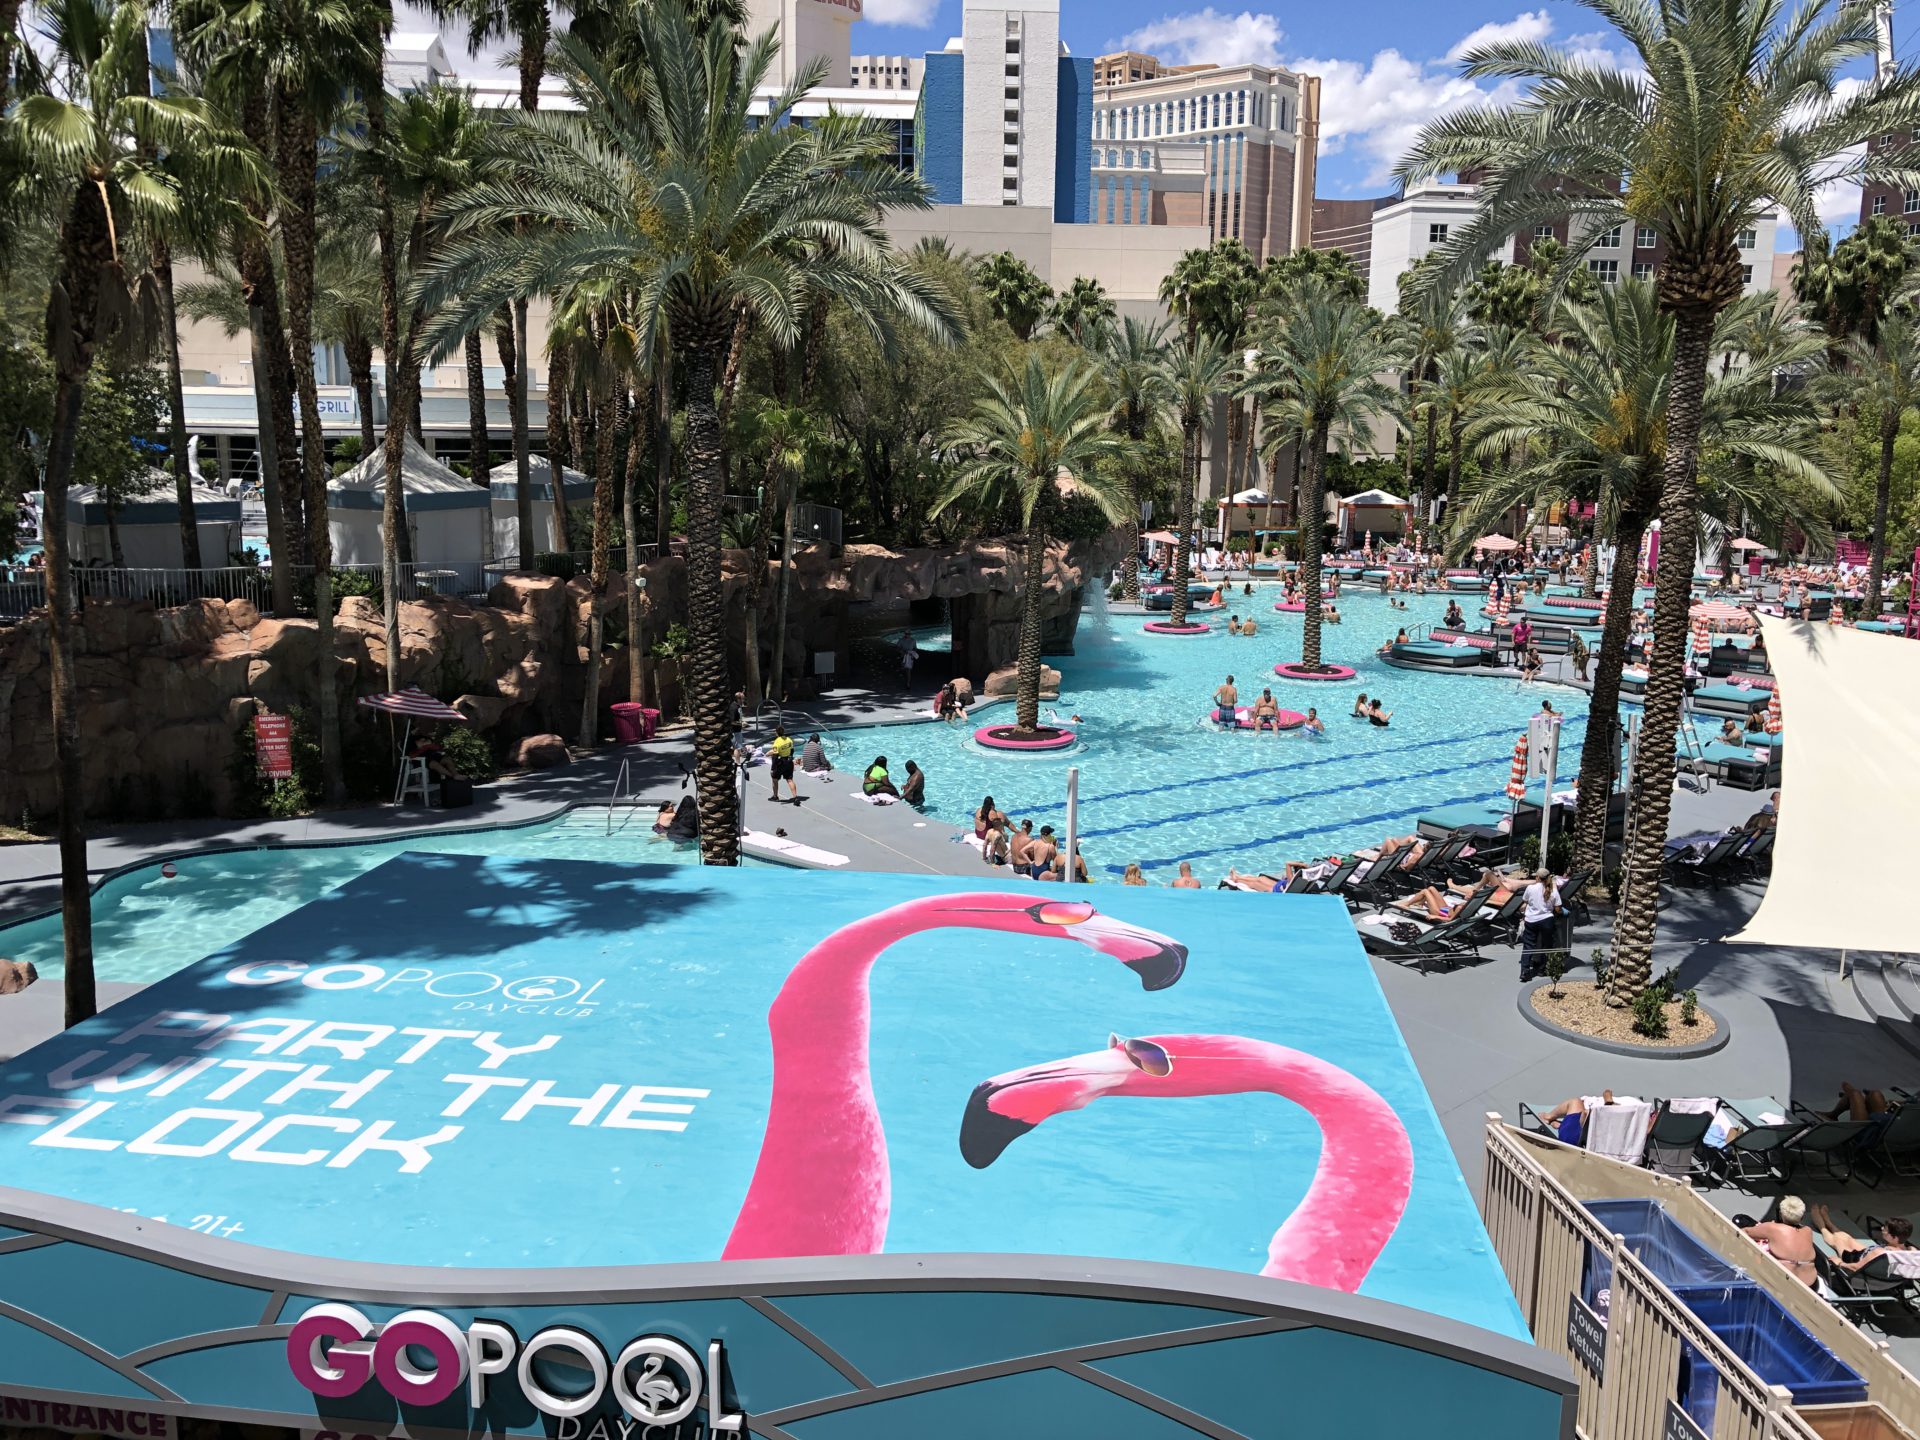 A waterpark with the sign saying Go Pool and the top of the building saying Party with the Flock where in the background you see visitor relaxing on floaties and enjoying their water activities in the pool.